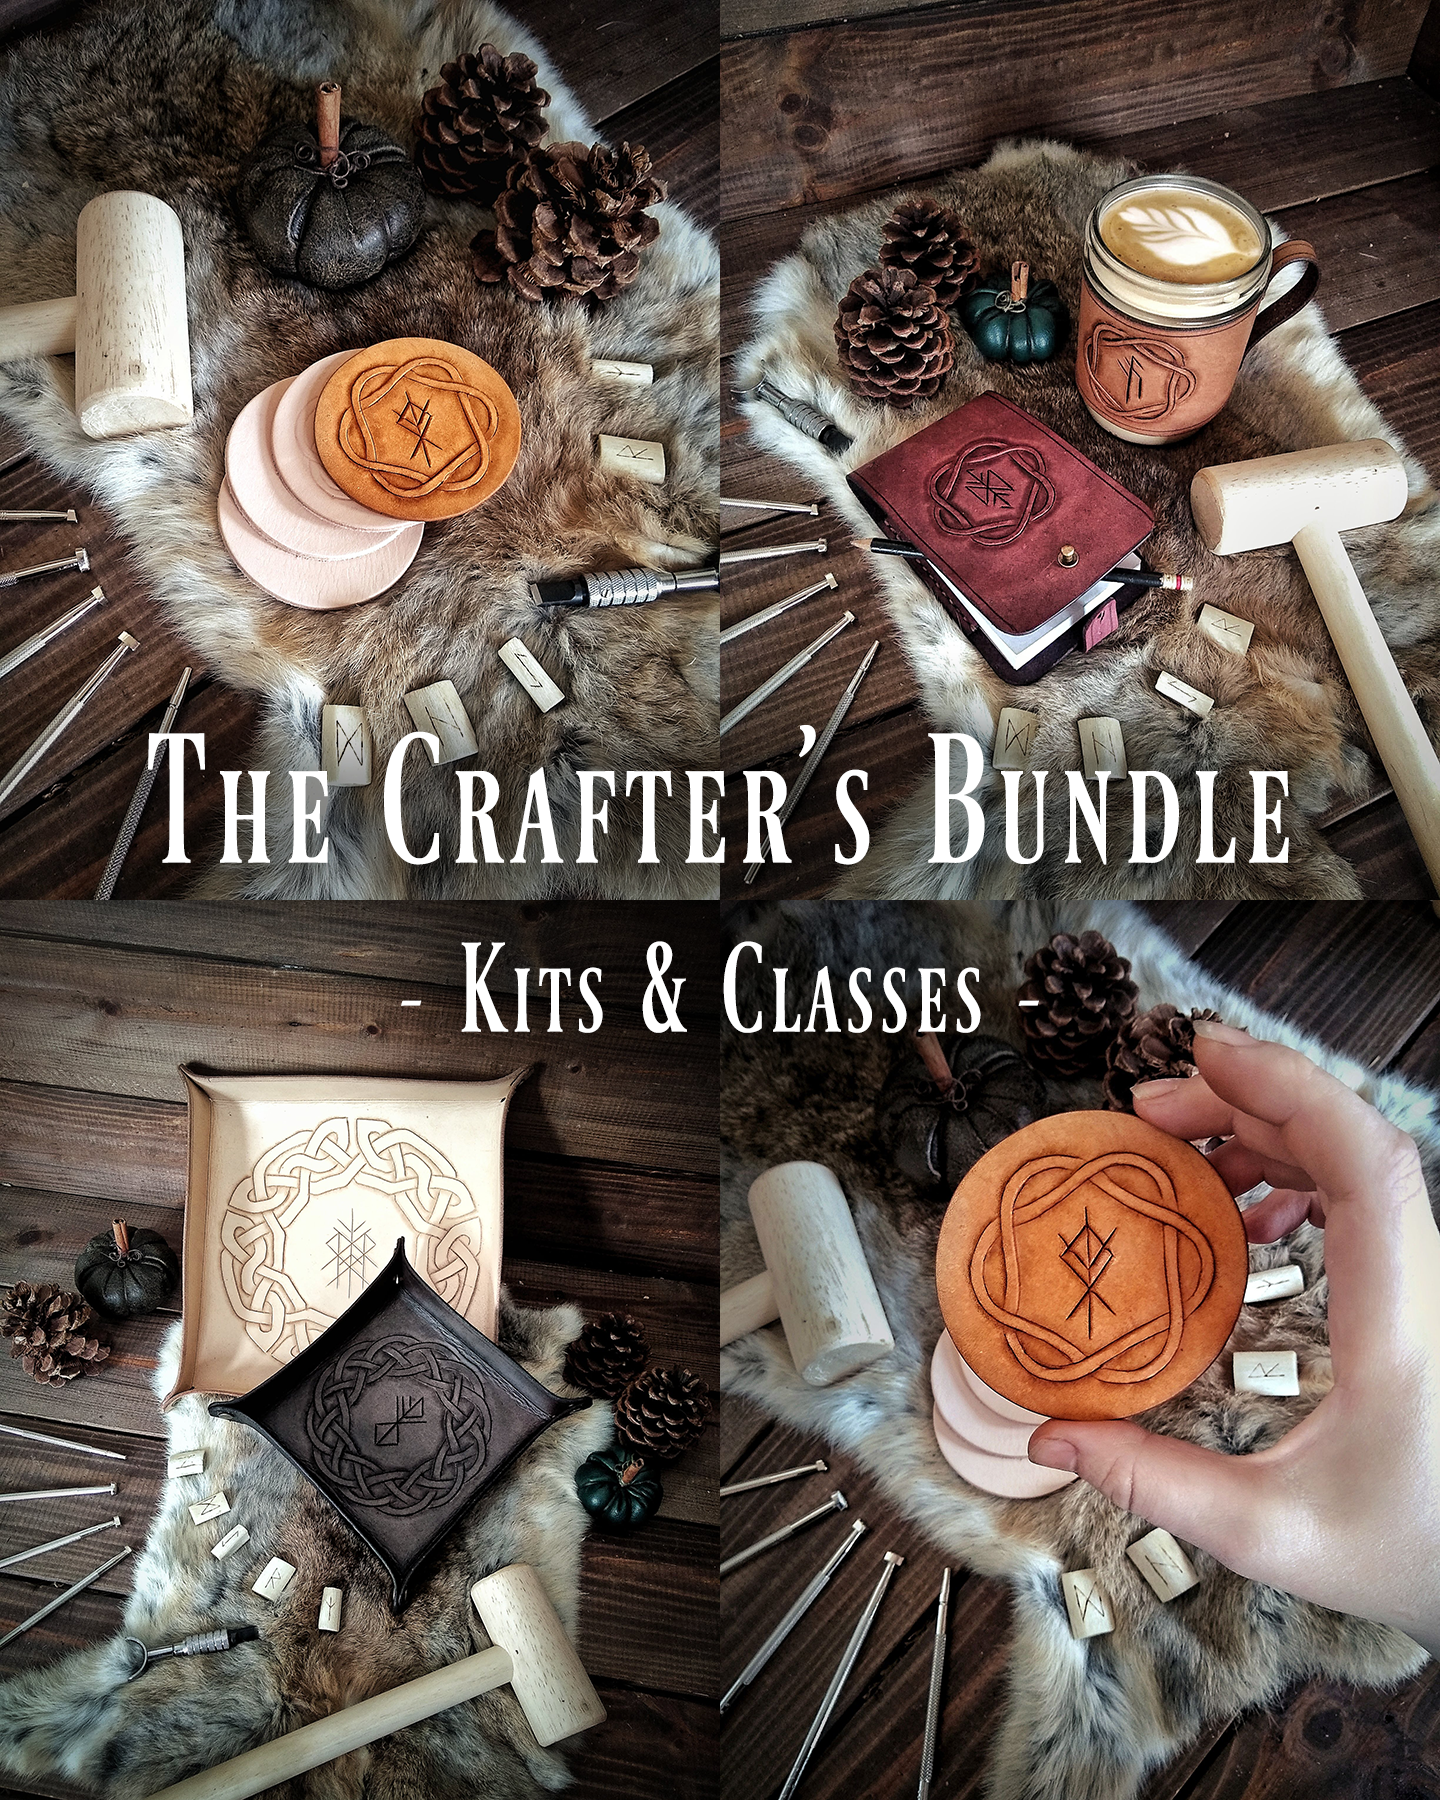 The Crafter's Bundle: 5 Kits & Classes